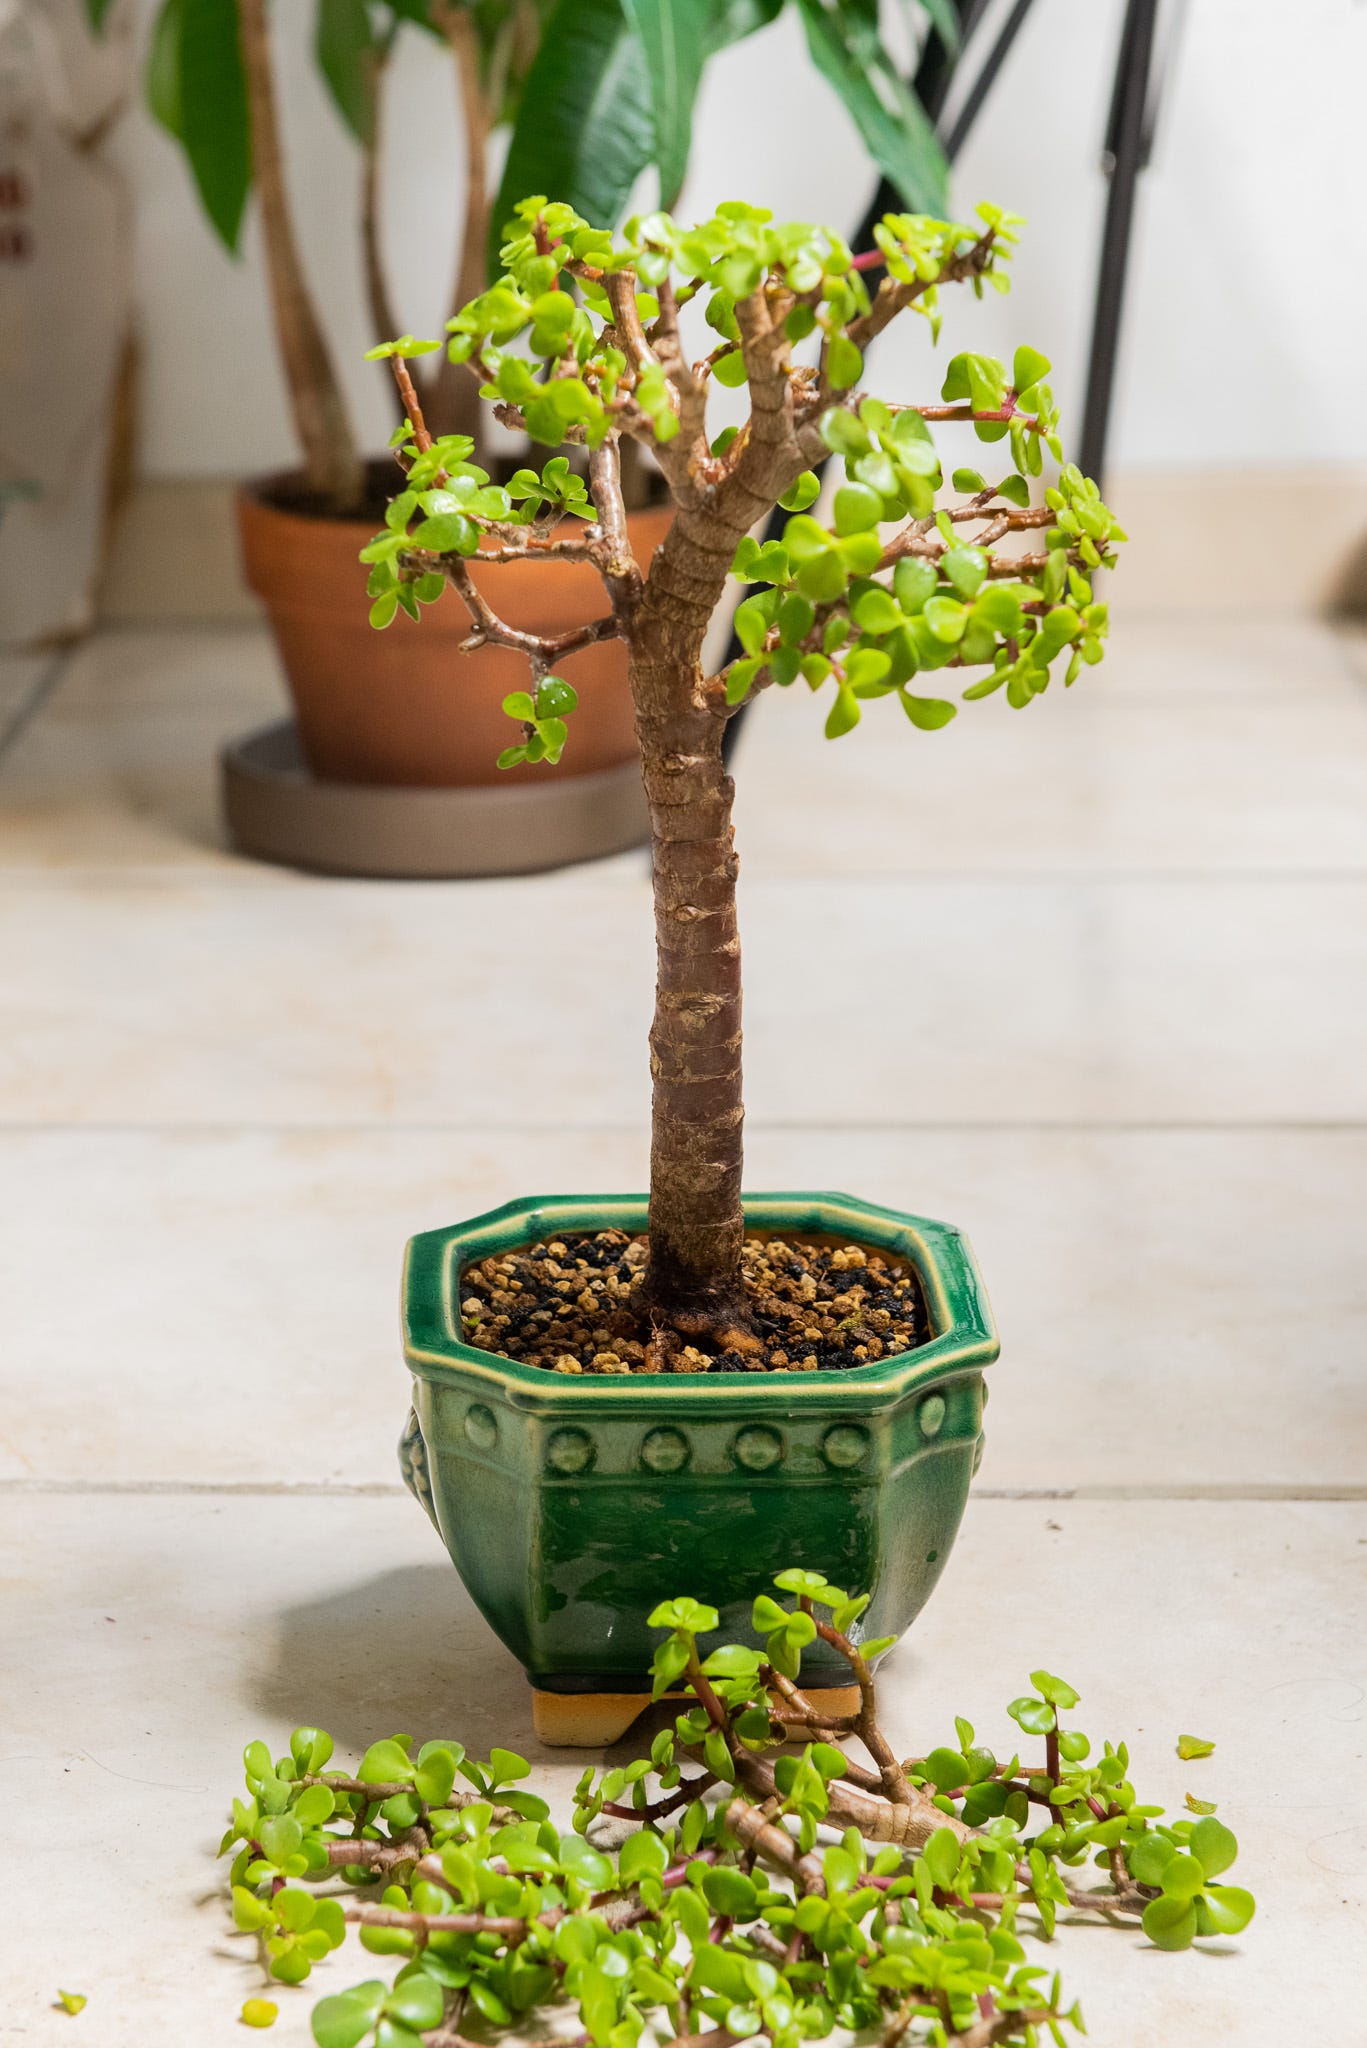 ID: The tree with some of the canopy trimmed, with the cuttings placed on the tile floor in front of the pot